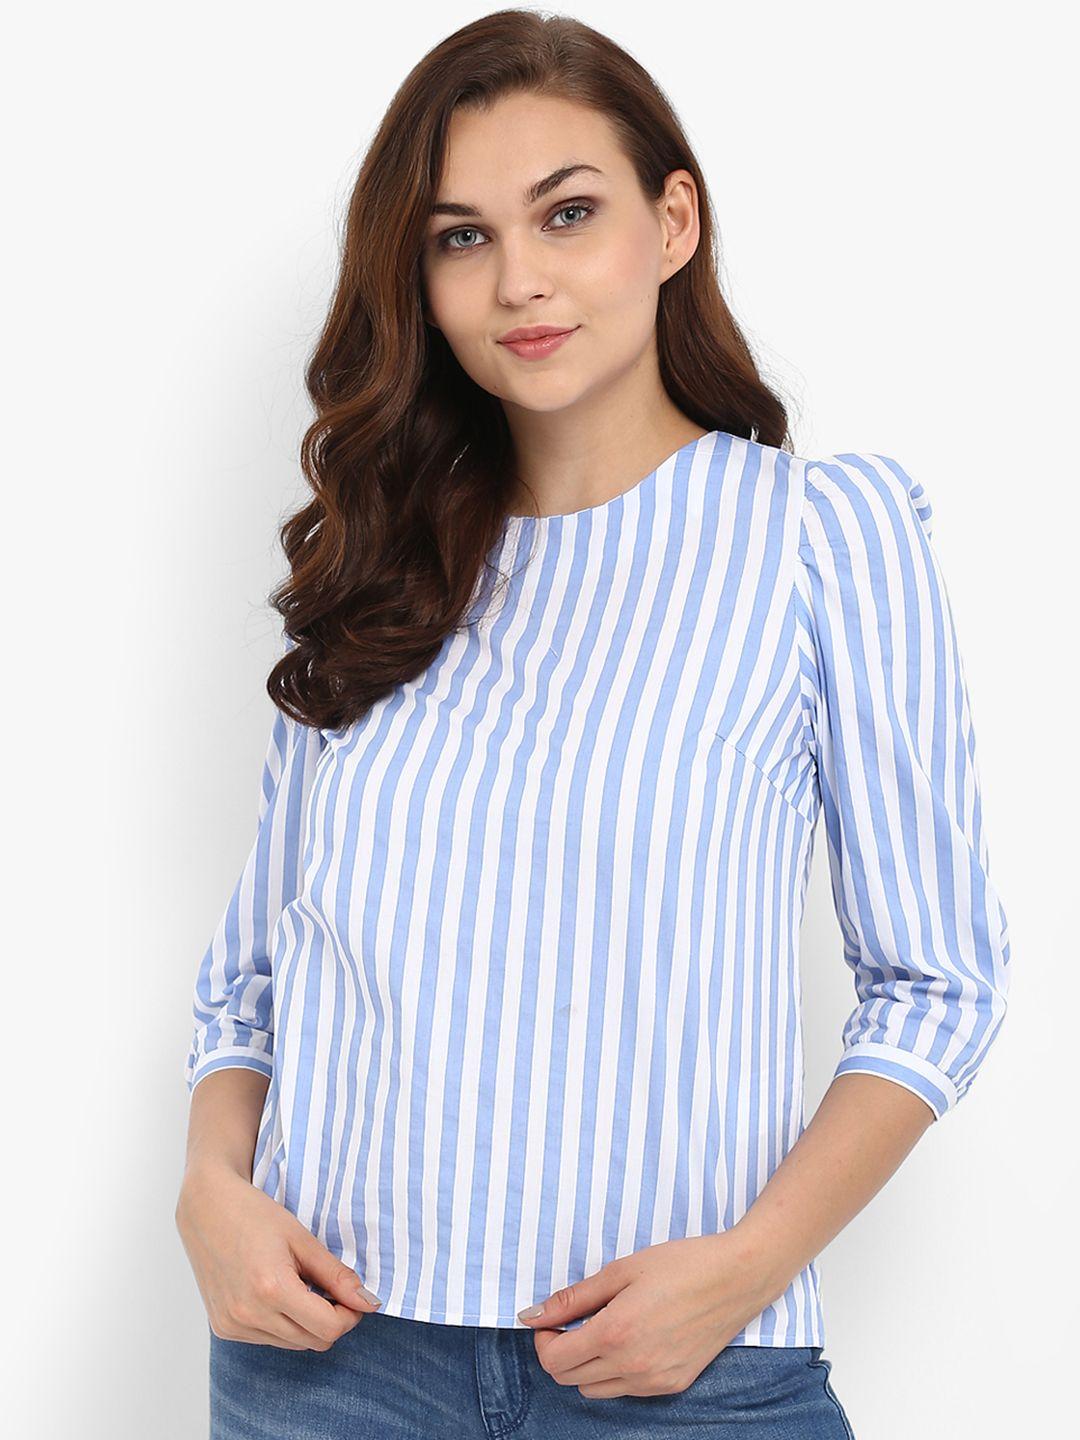 athah white & blue striped top